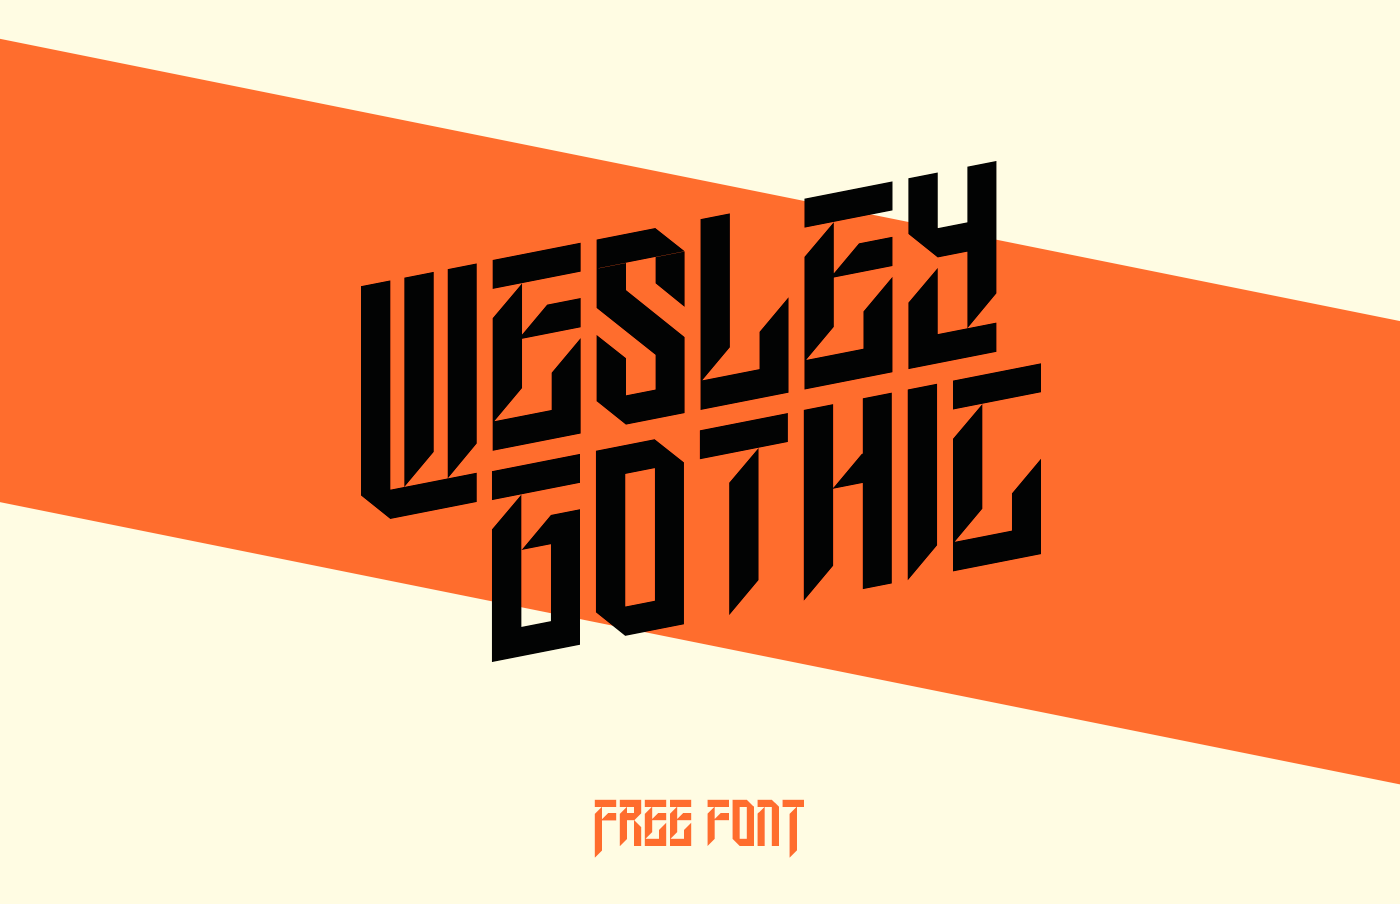 Example font Wesley Gothic #1